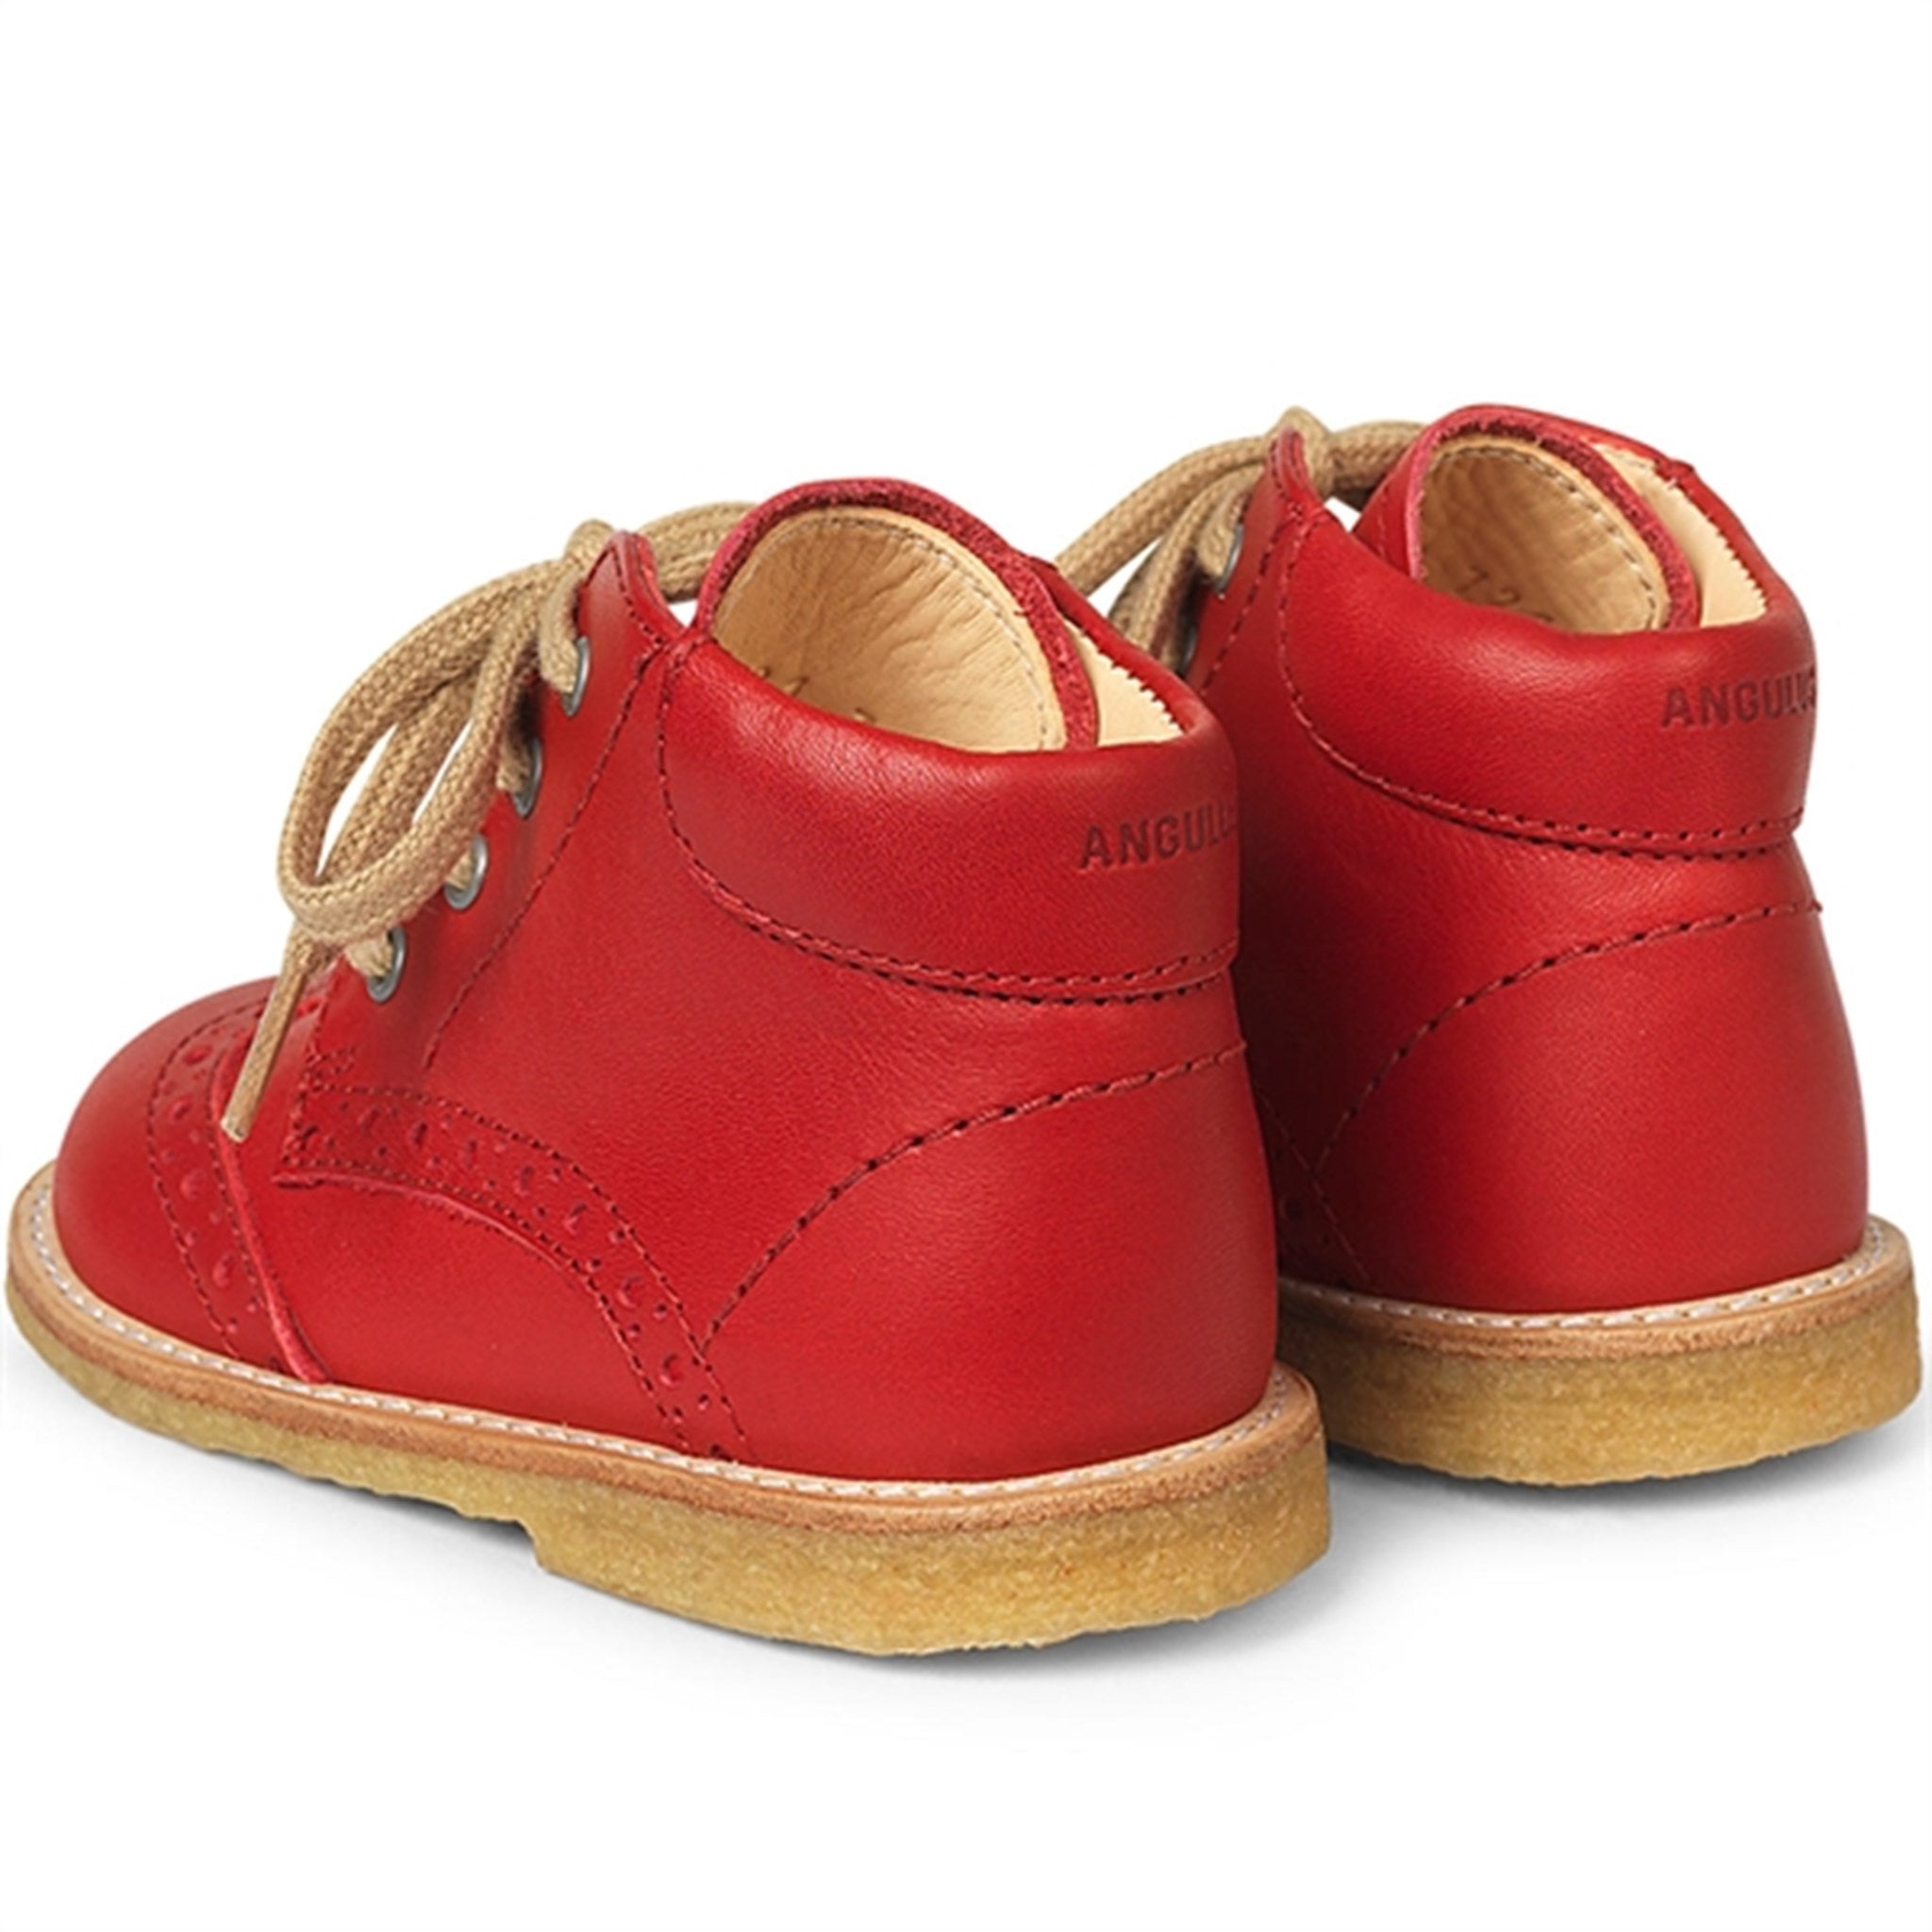 Angulus Beginner Shoes w. Lace Red 2378-101-1412 3